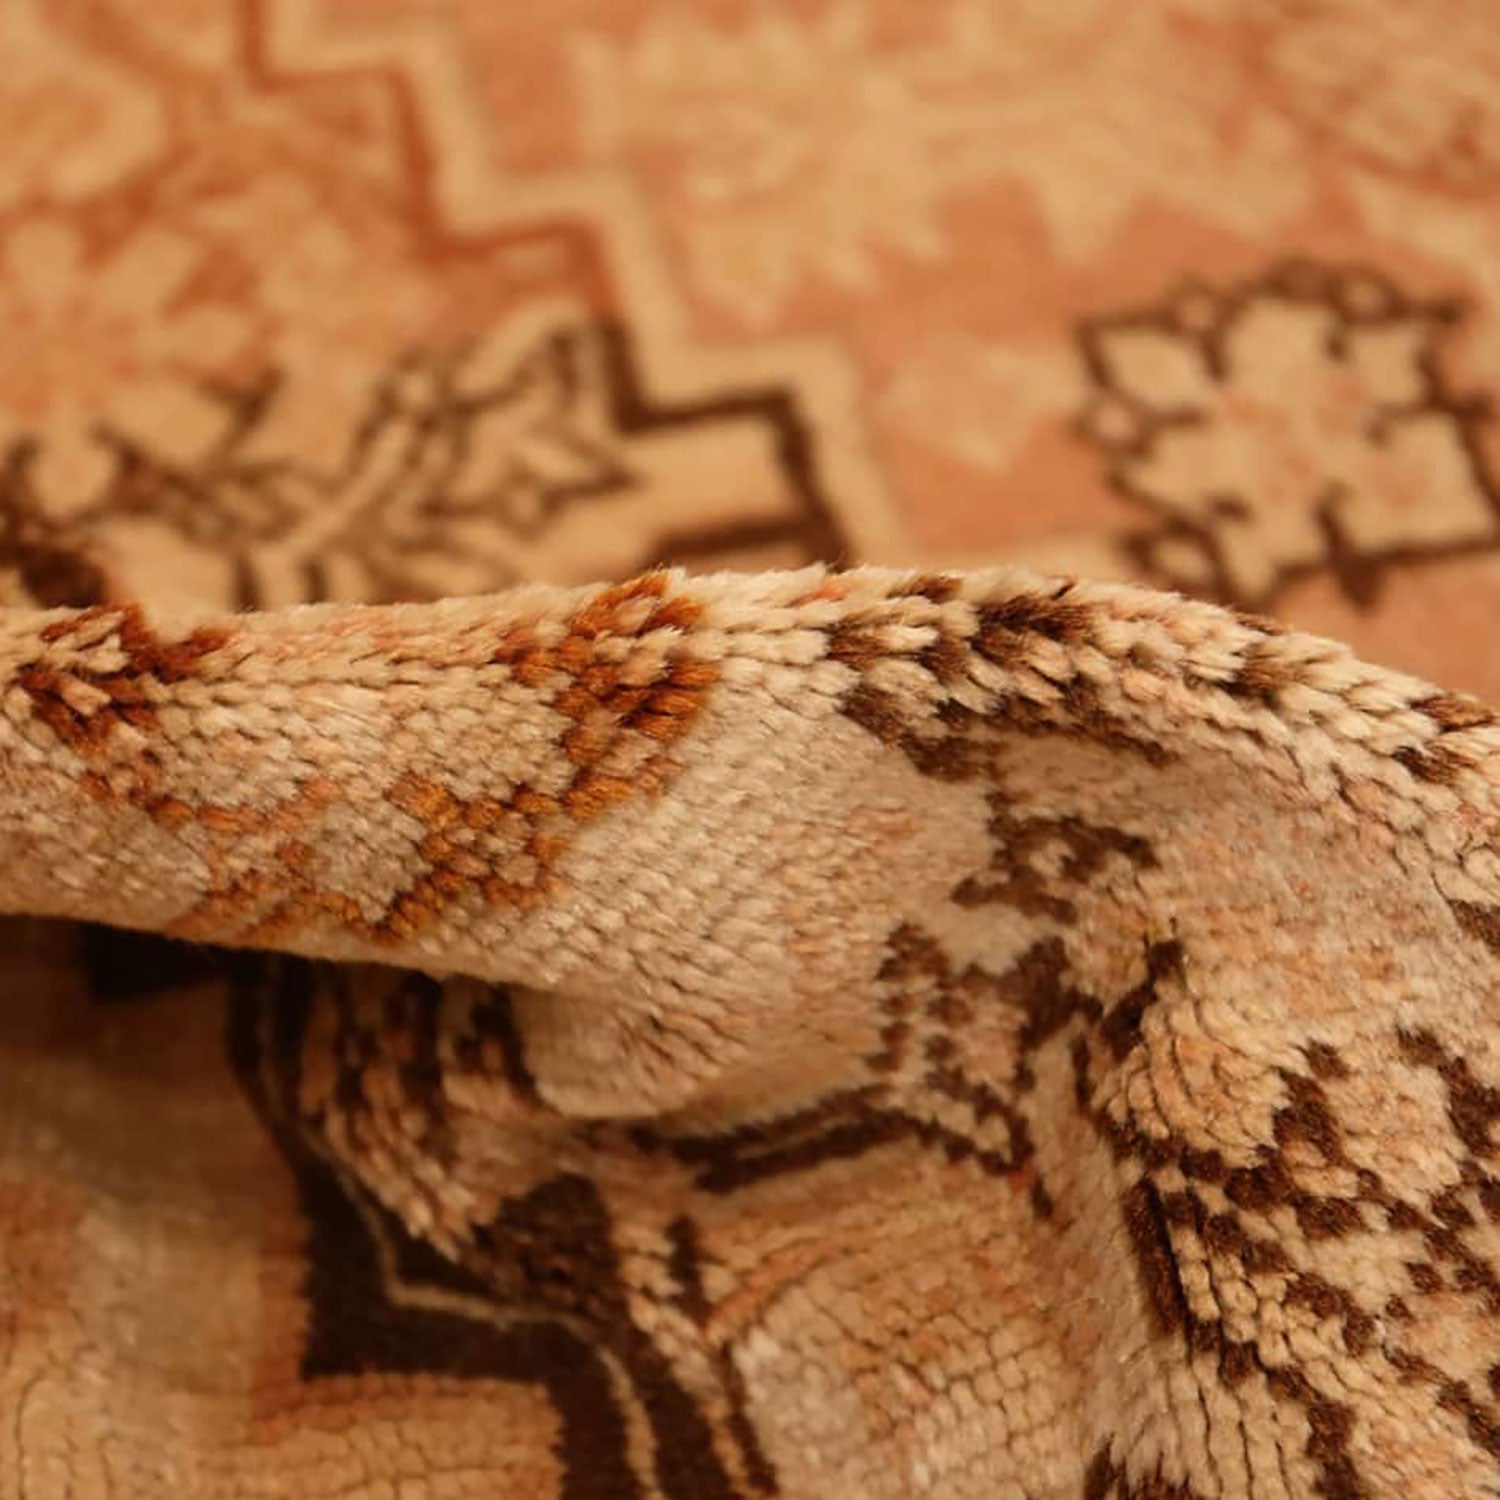 Intricate folded textile with geometric and organic pattern in warm tones.